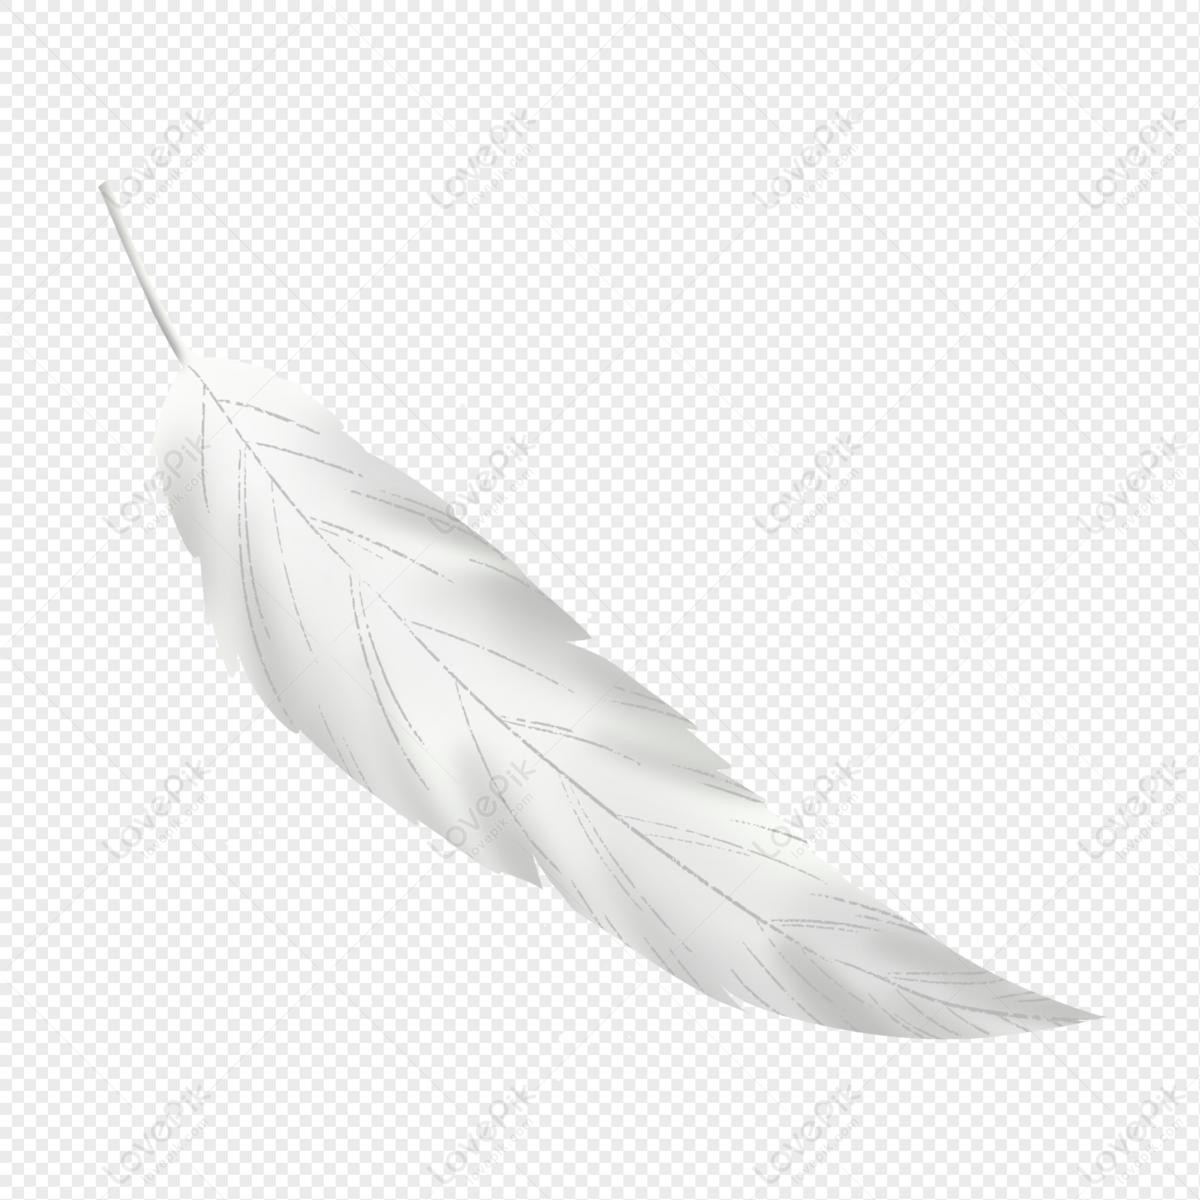 White And Brown Feathers Texture Background Stock Photo - Download